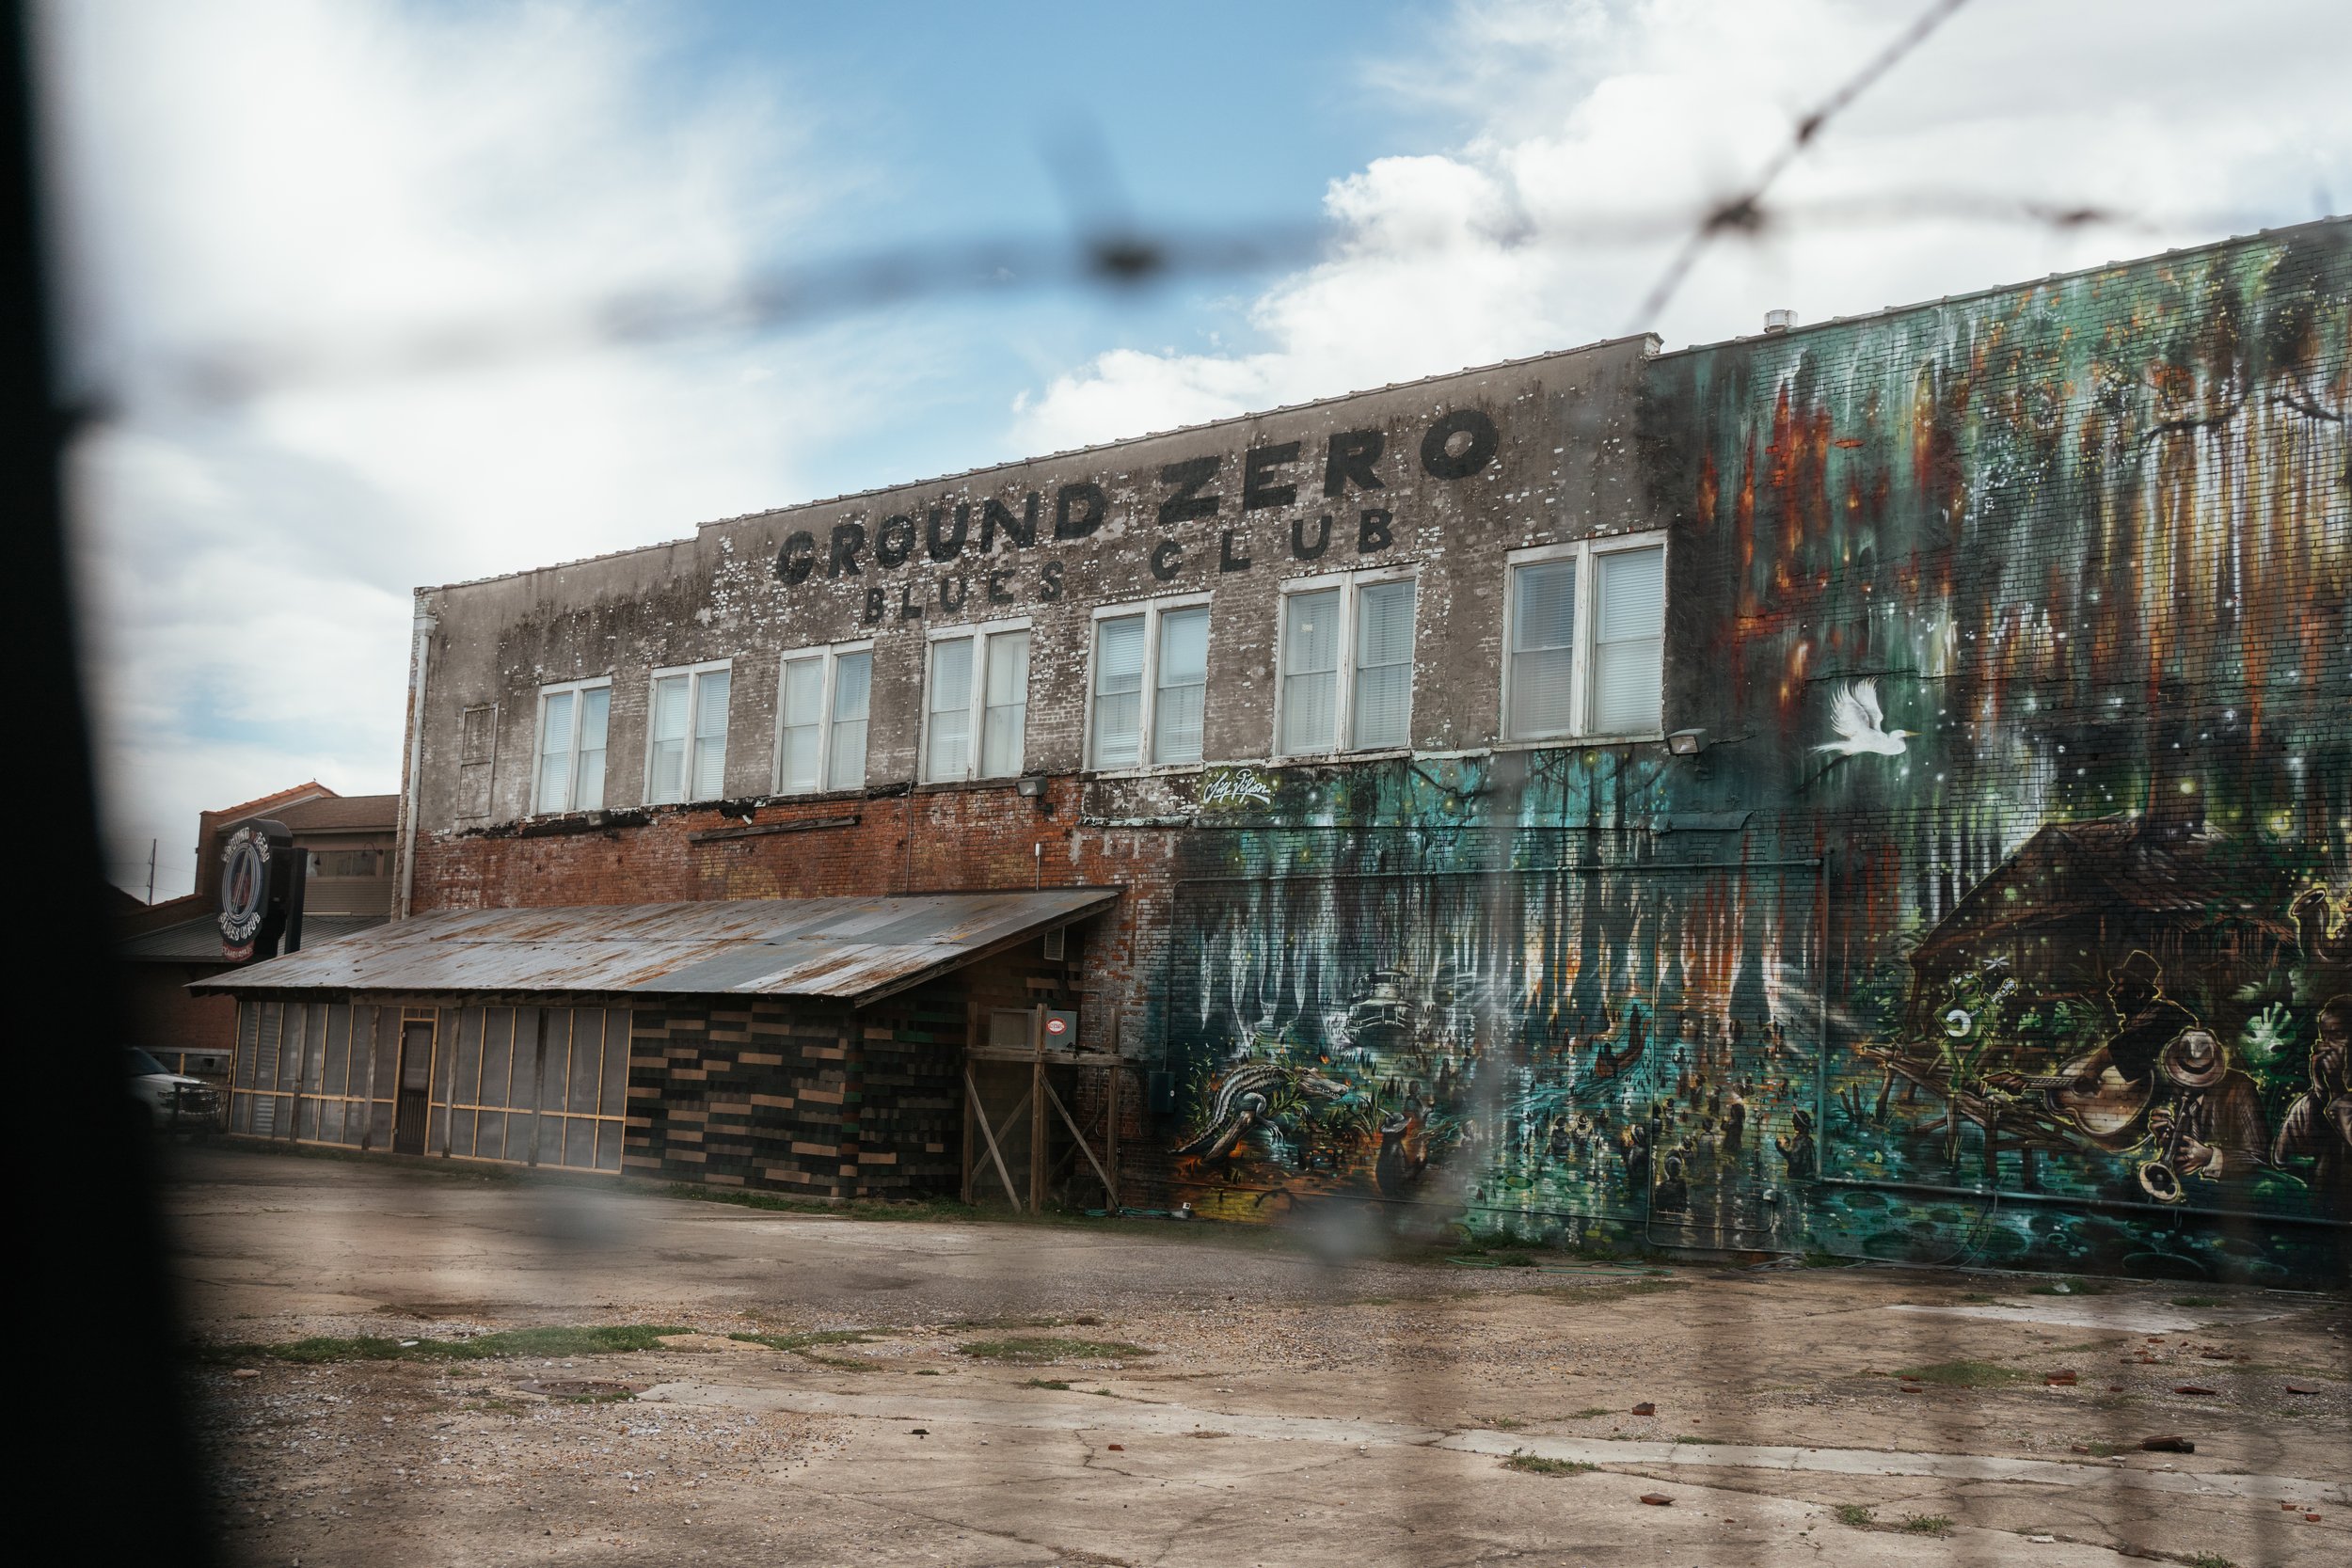 Ground Zero is a blues club in Clarksdale, Mississippi owned (and frequently visited) by Morgan Freeman. Yes, that Morgan Freeman.